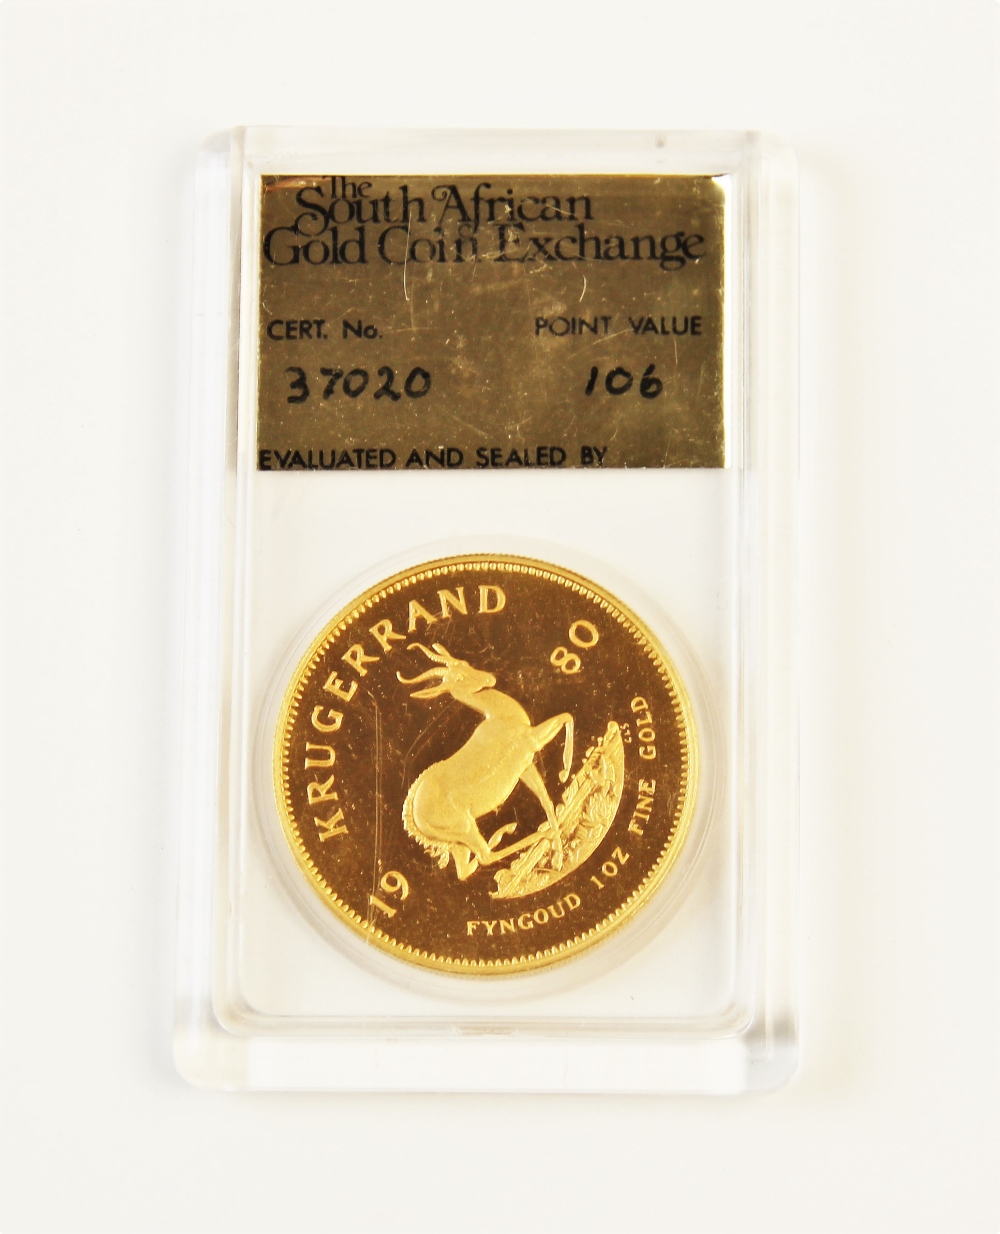 A South Africa Krugerrand 1980, in a plastic display case with evaluation certificate from The South